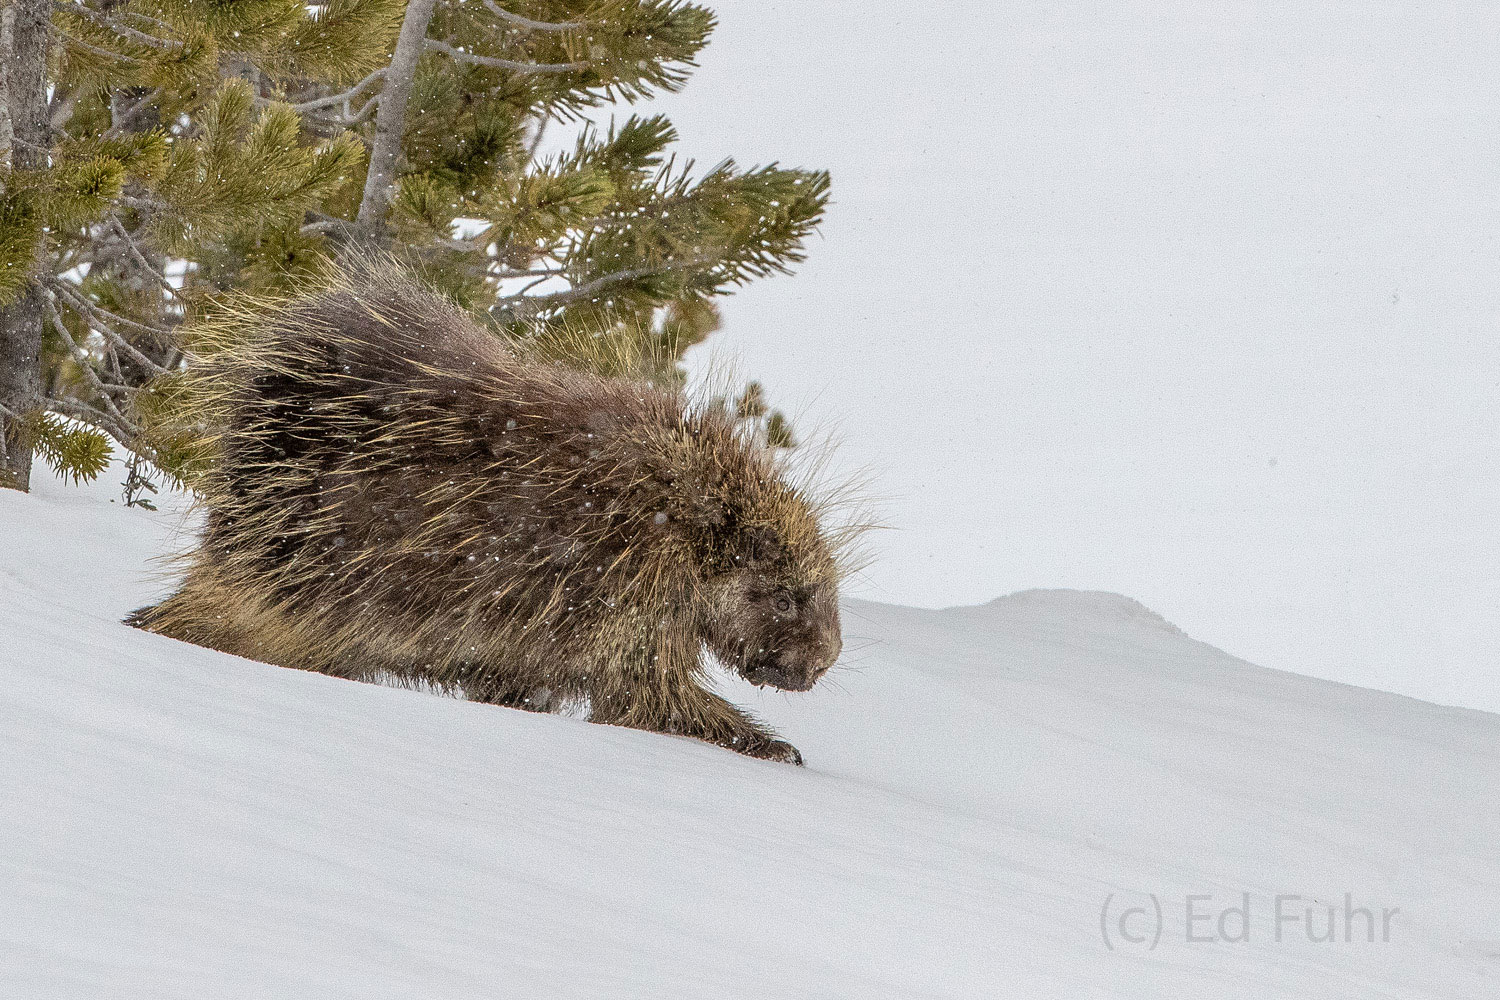 A porcupine scurries across the snow.